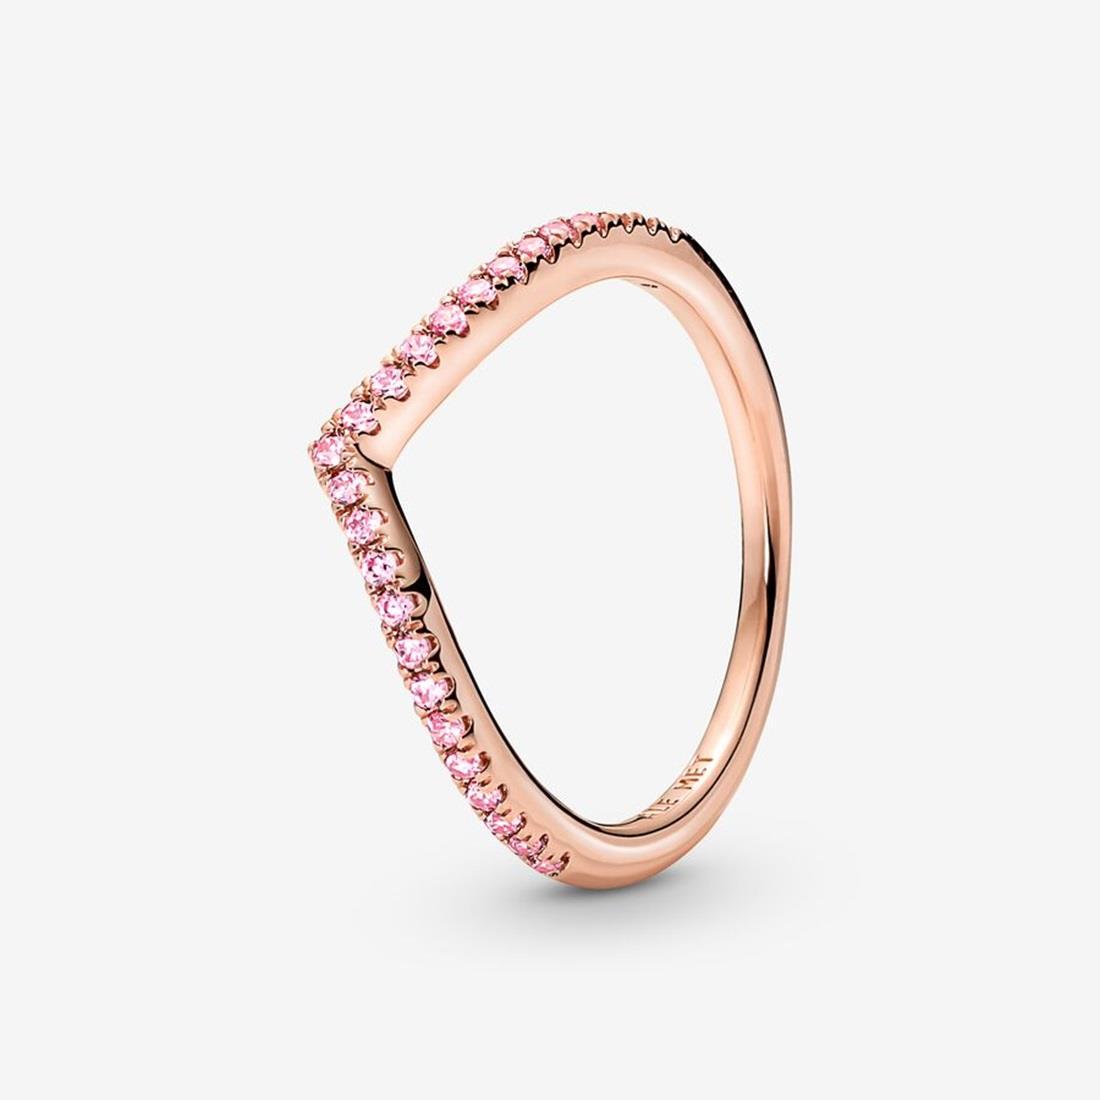 Chevron ring in rose gold plated silver with pink zircons - PANDORA